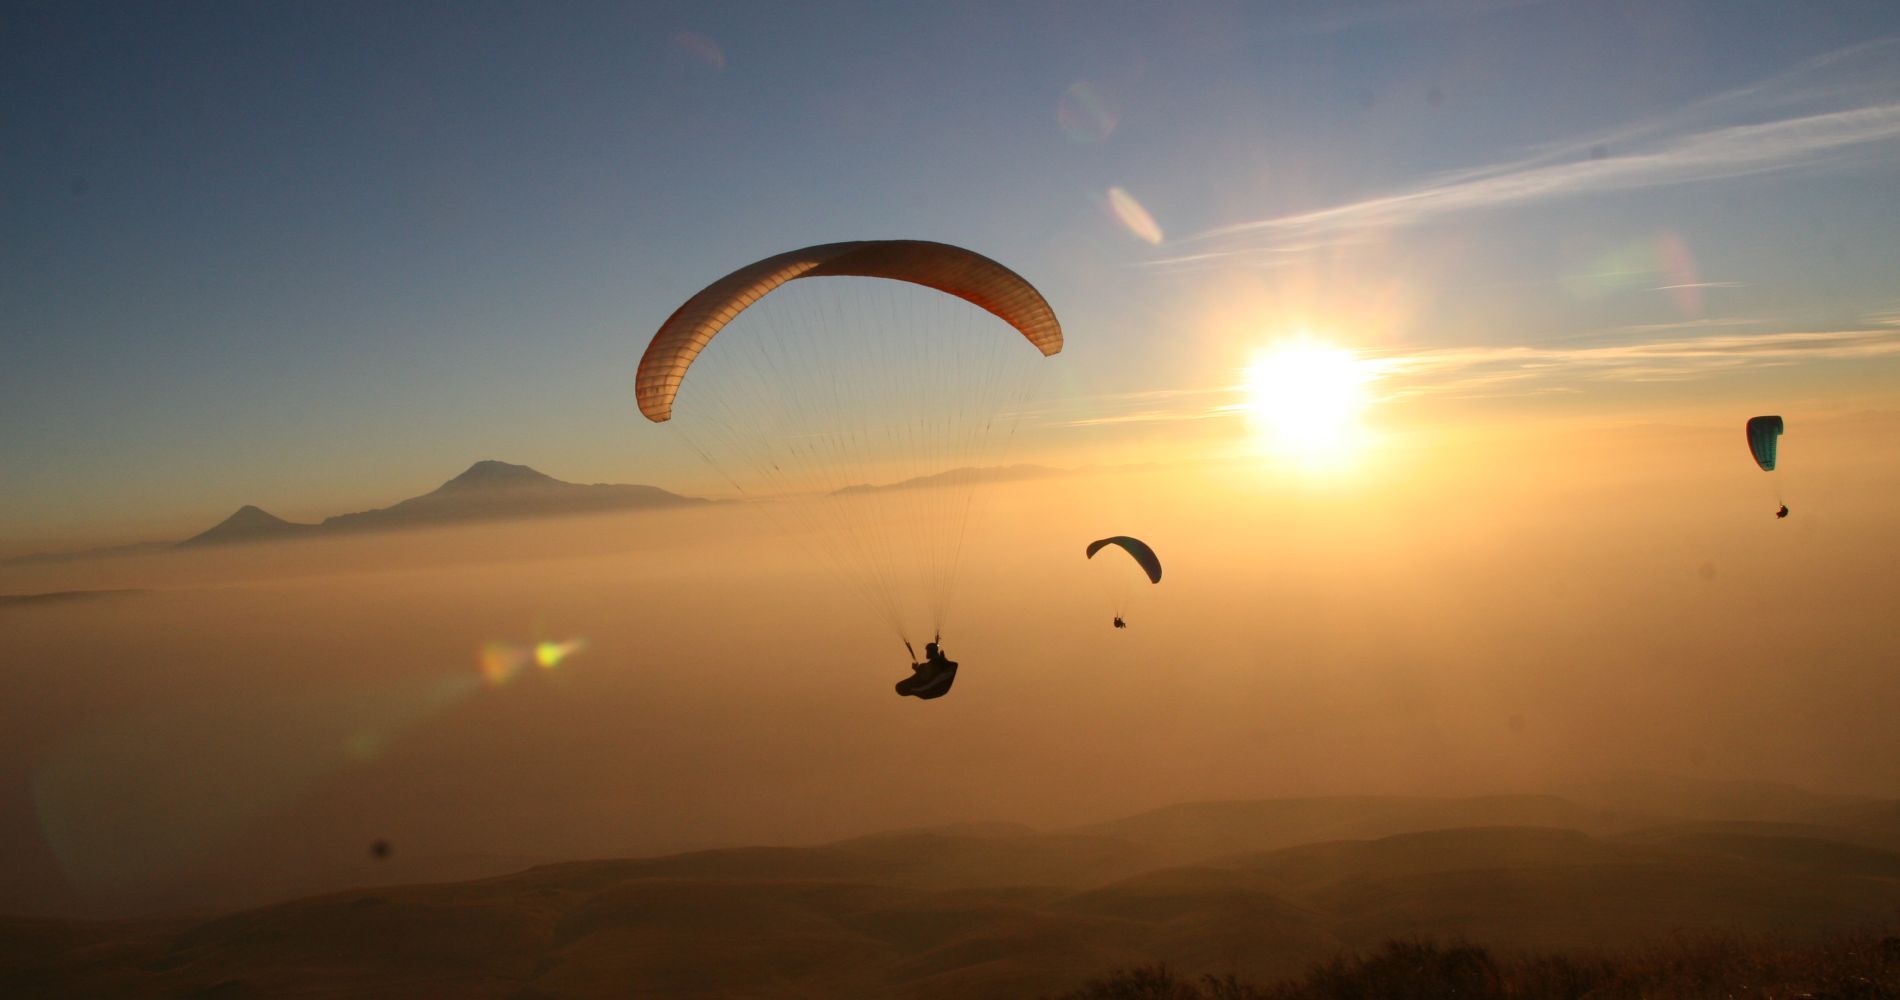 several people paraglide in France as part of a tinggly experience wedding gift